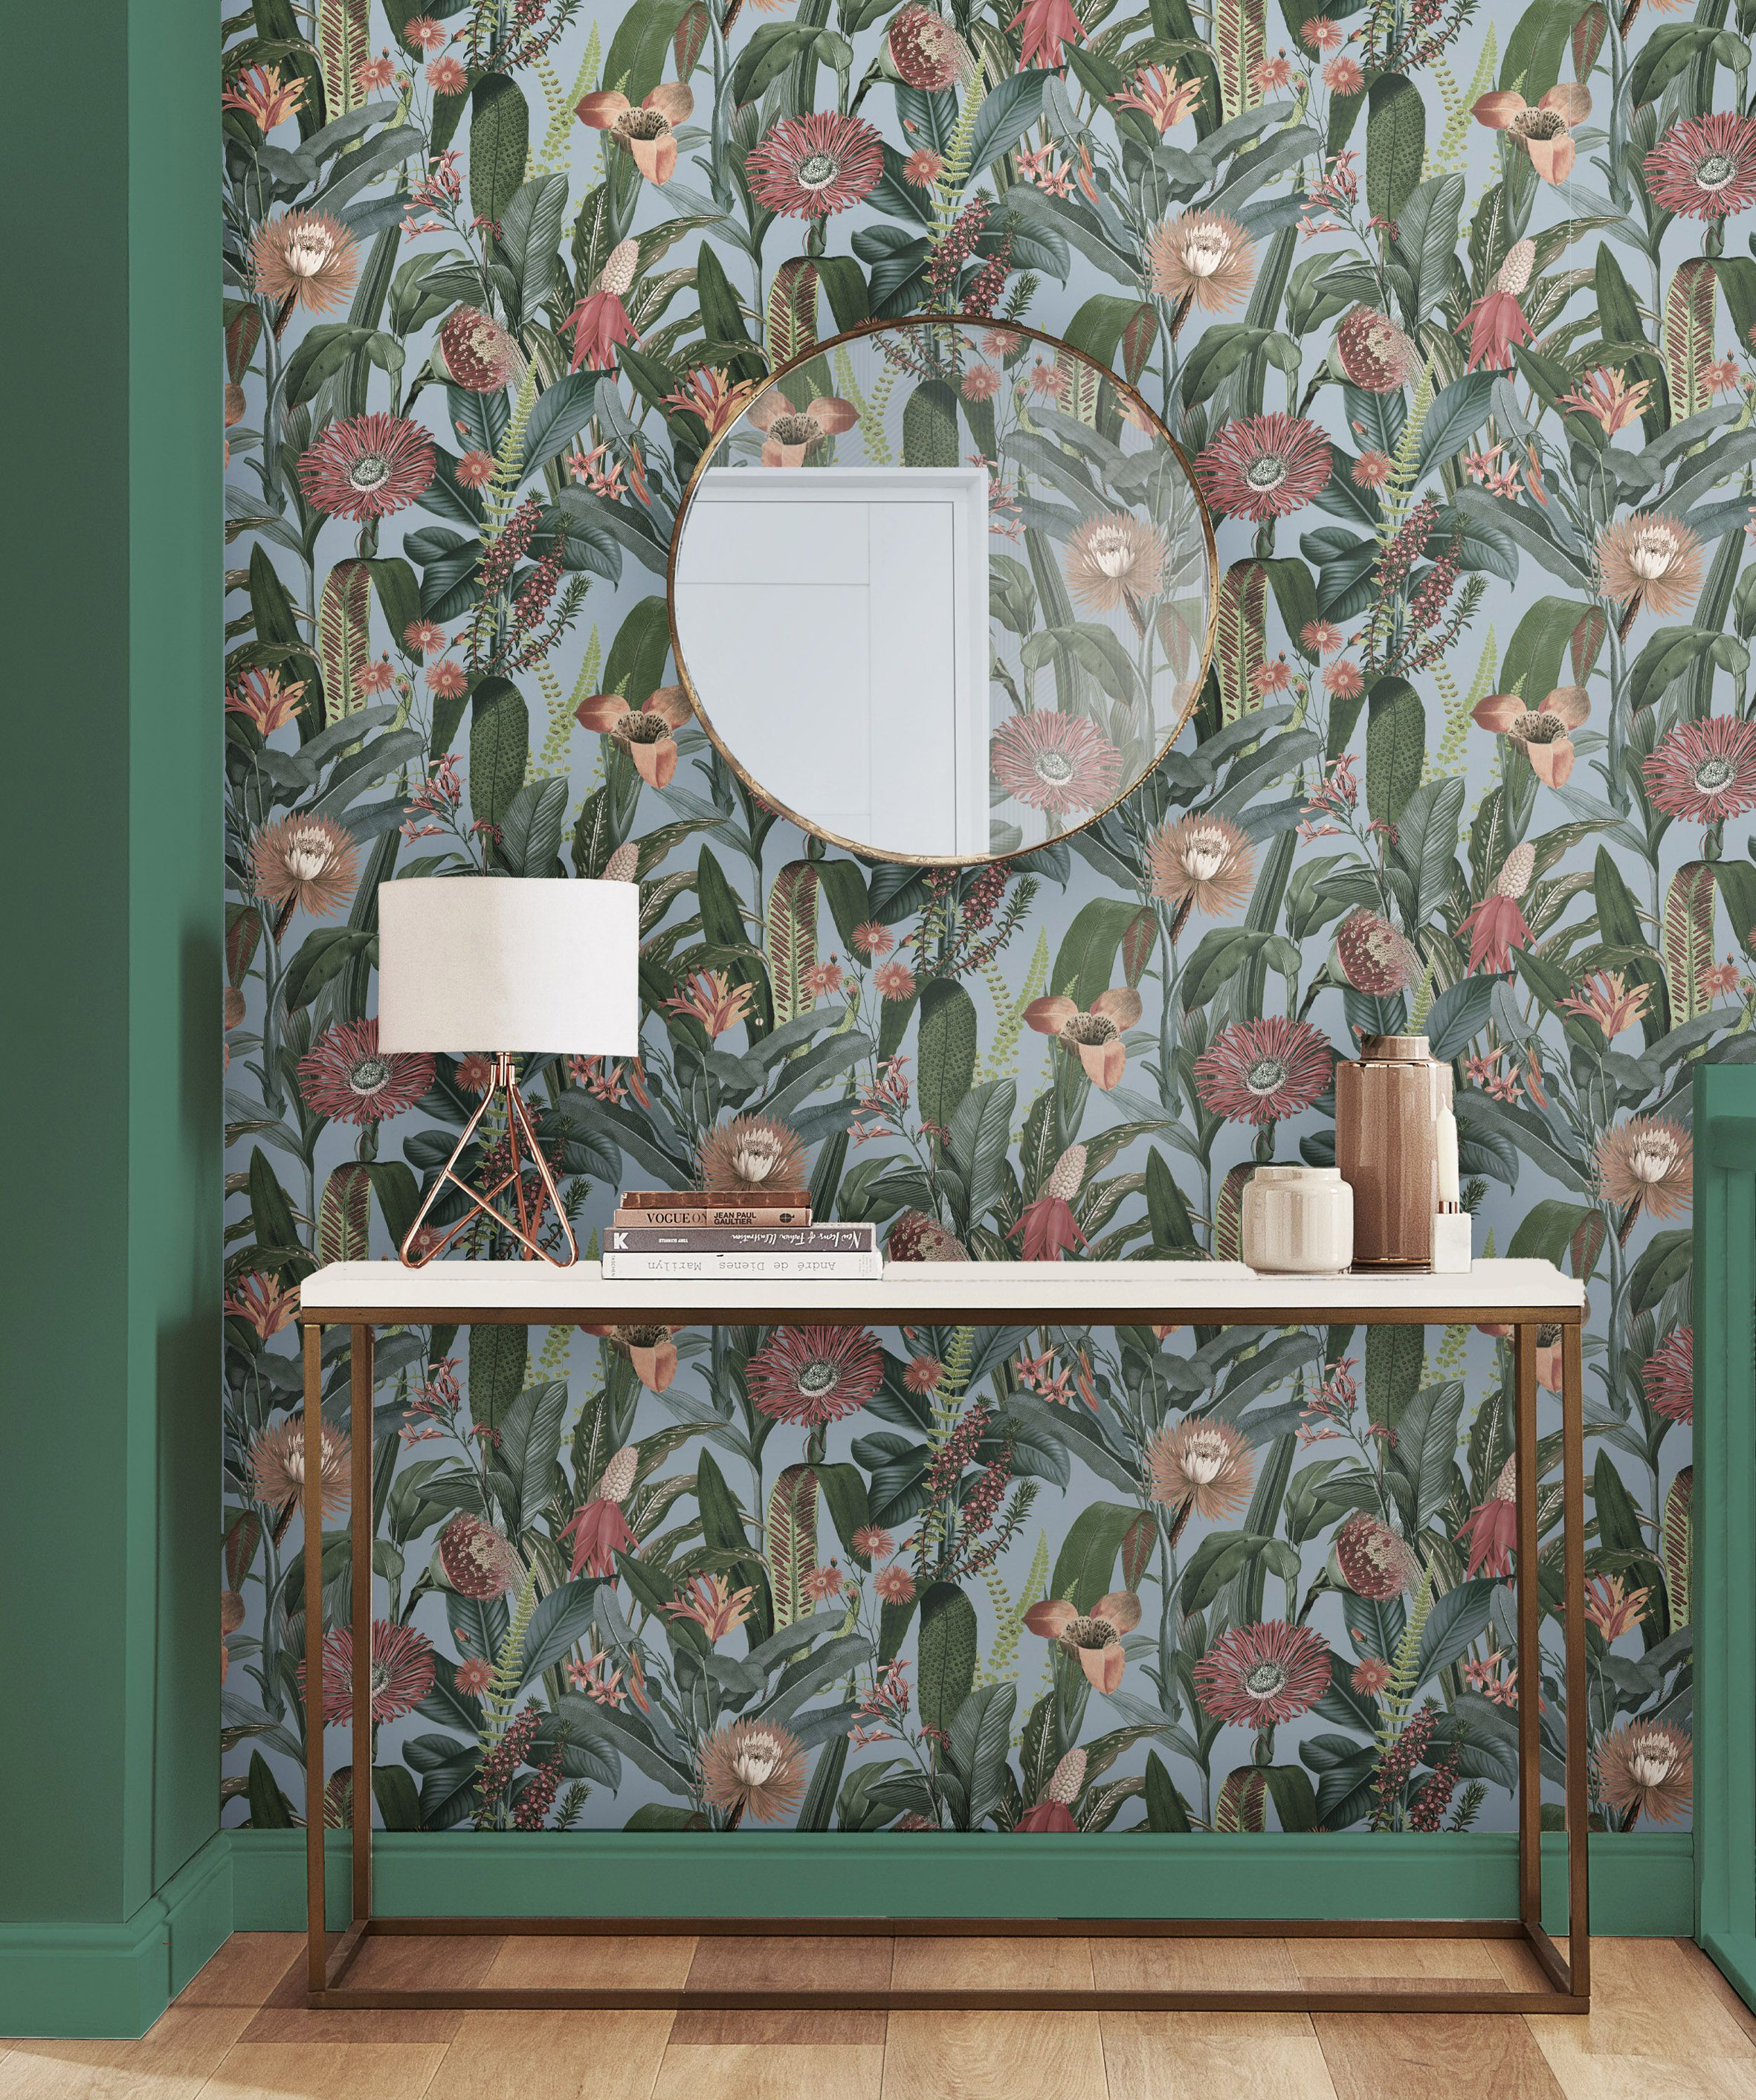 Tigerlilly Lush Wallpaper, £65 per roll, Graham & Brown, more stock coming in, available from June 29, Graham & Brown 